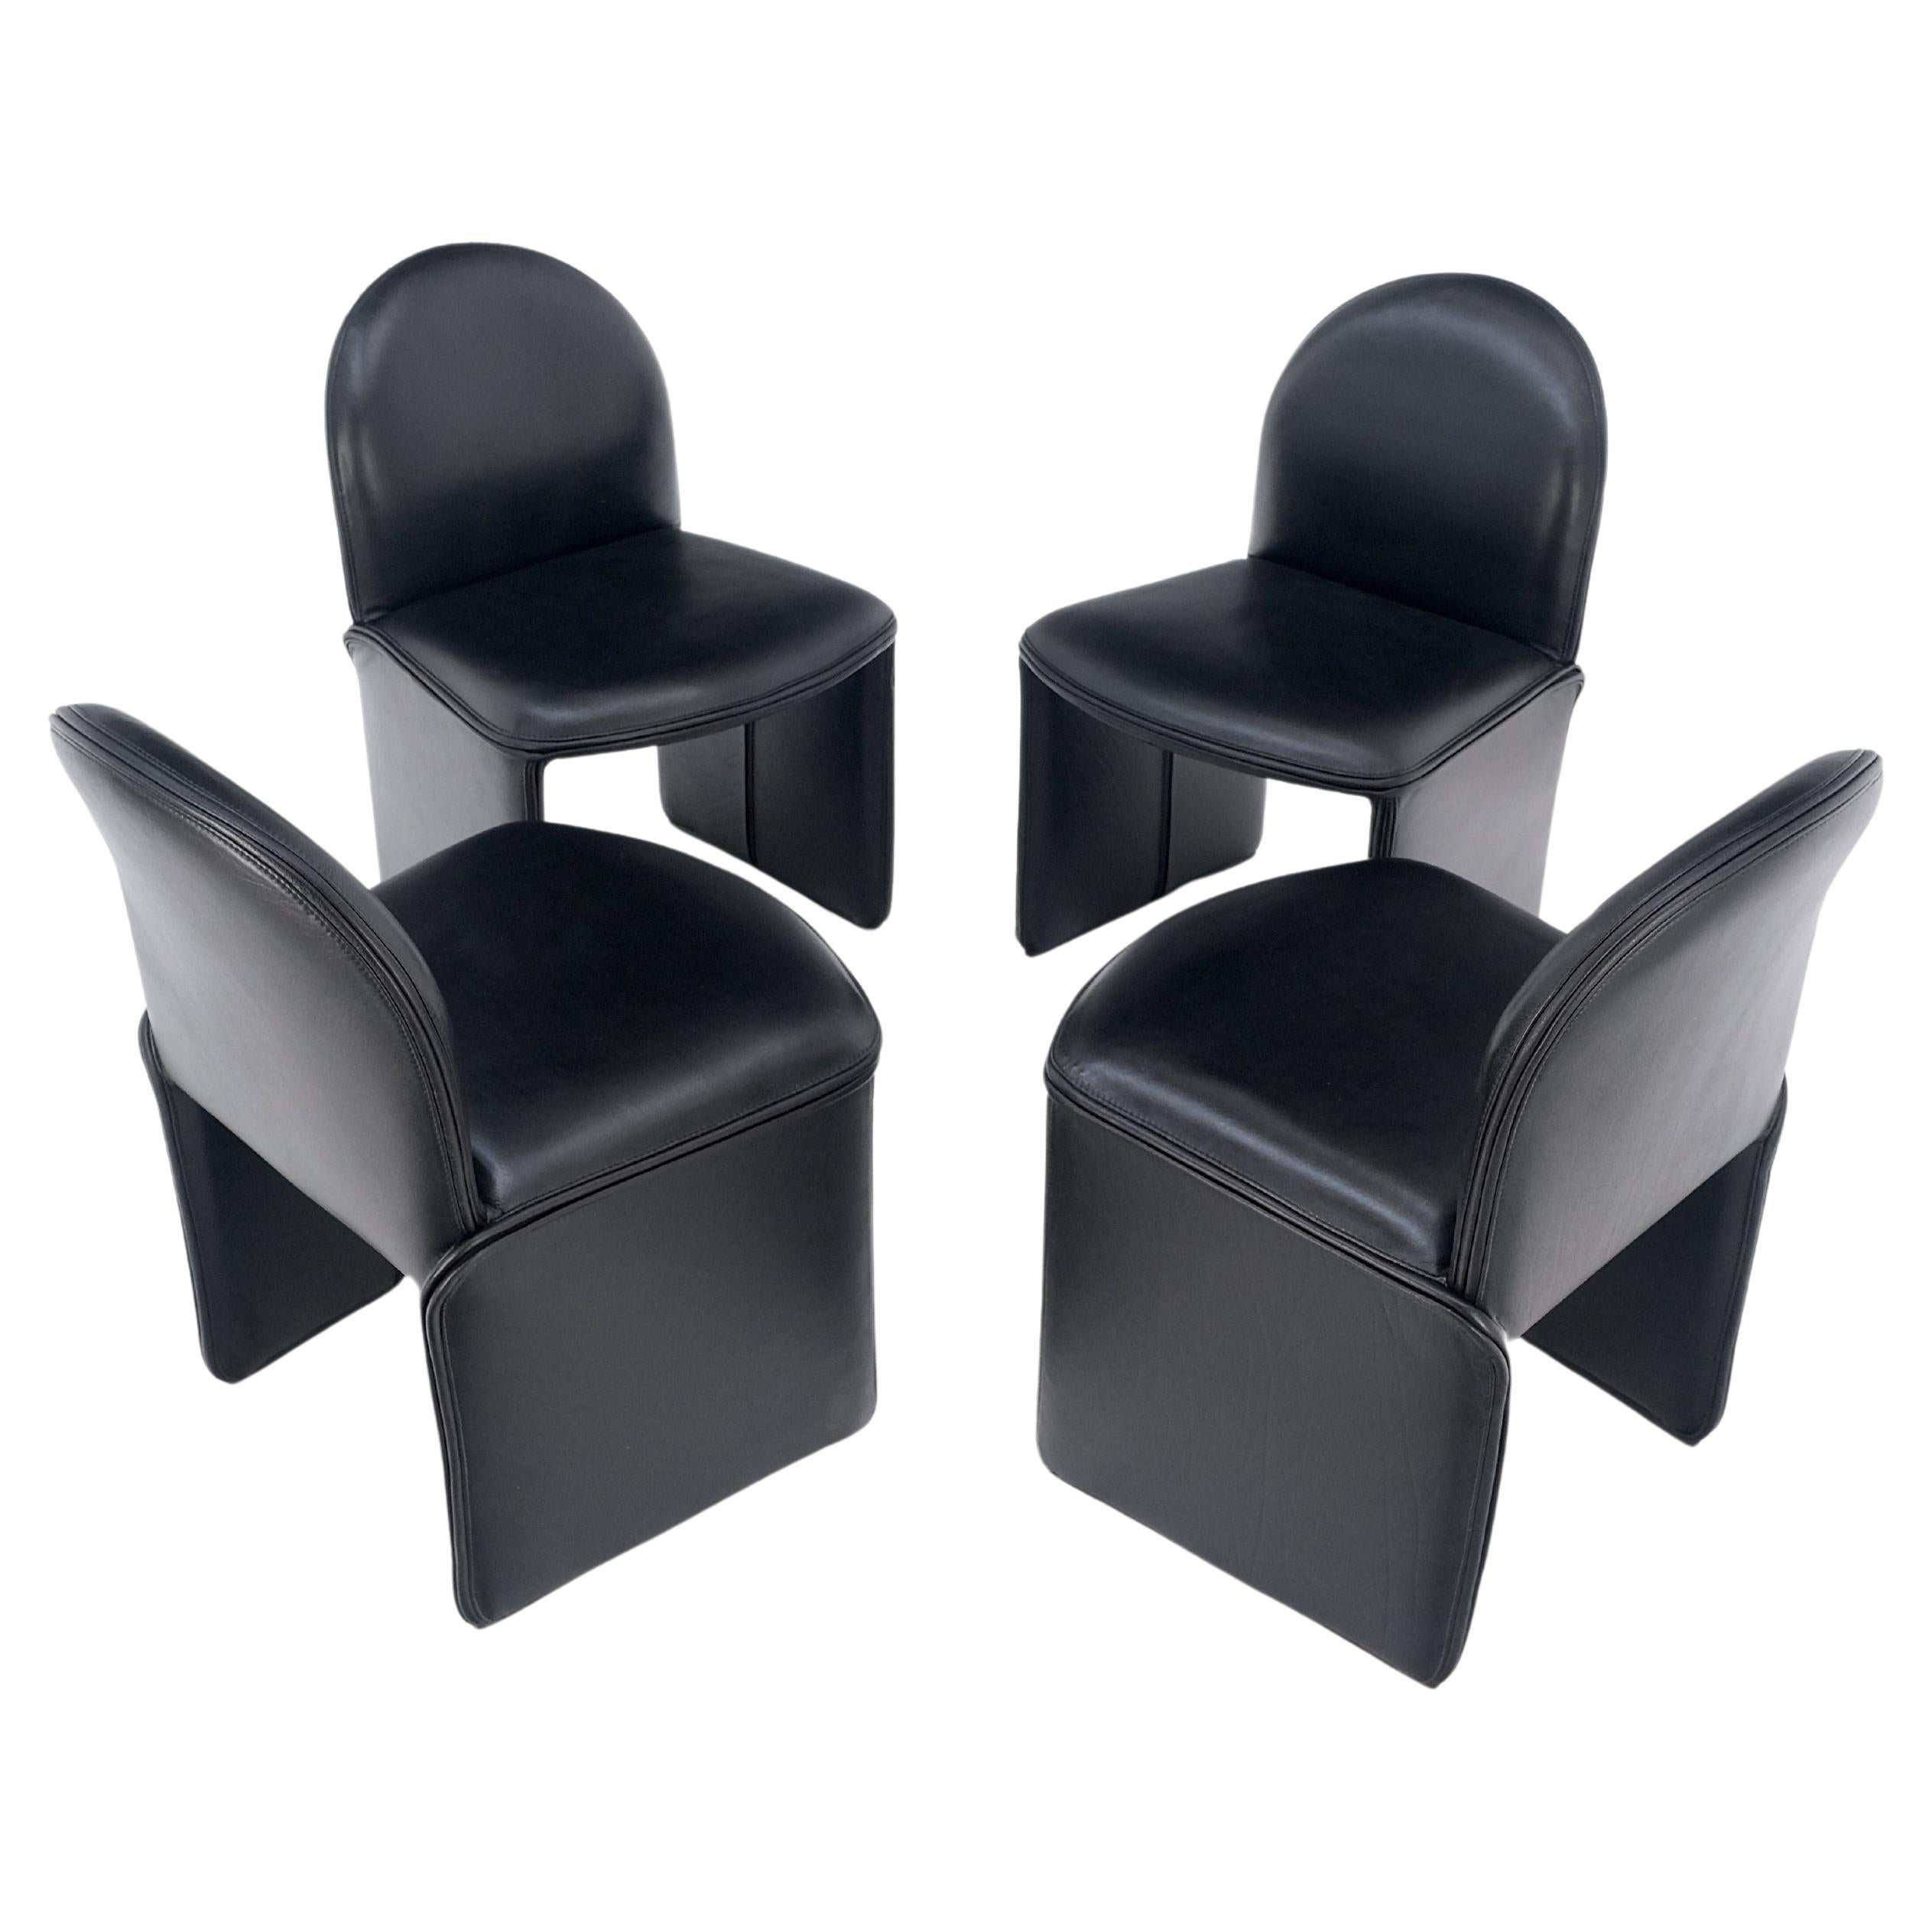 Set 4 Italian Mid Century Modern Black Leather Dining Chairs Bellini Style MINT! For Sale